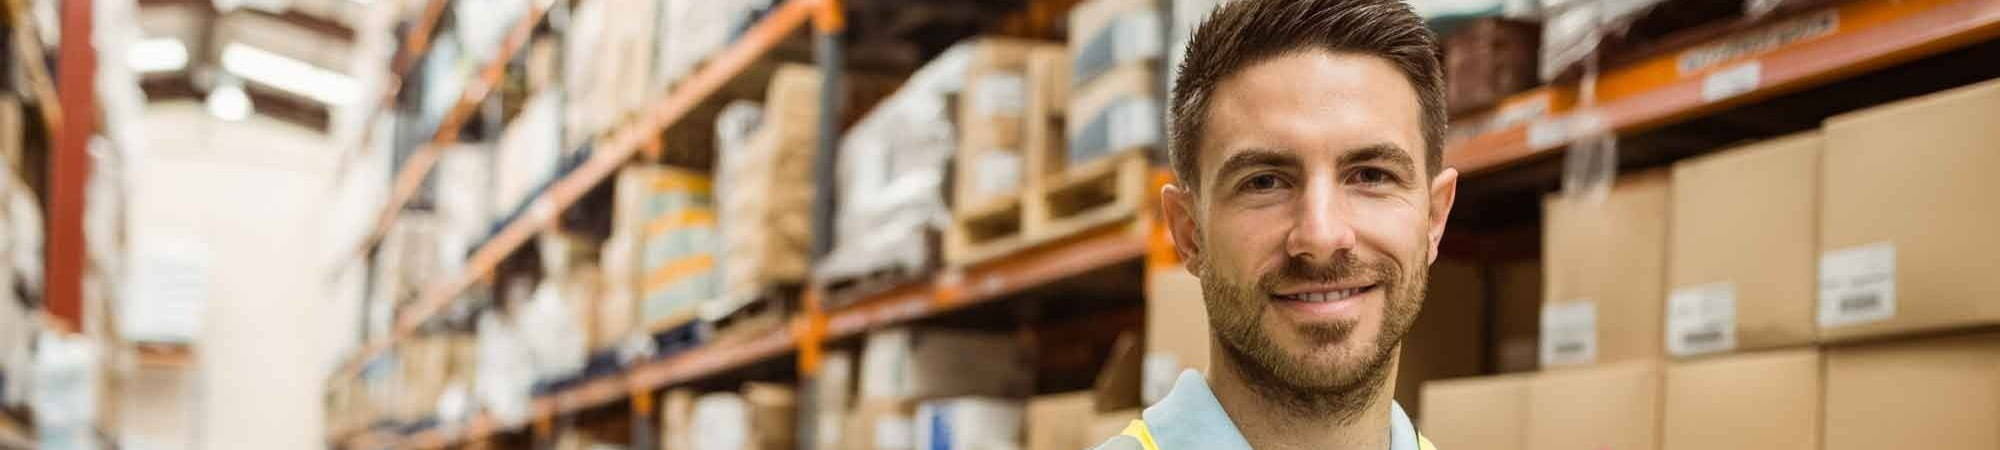 Permanent employee smiling at camera working in warehouse